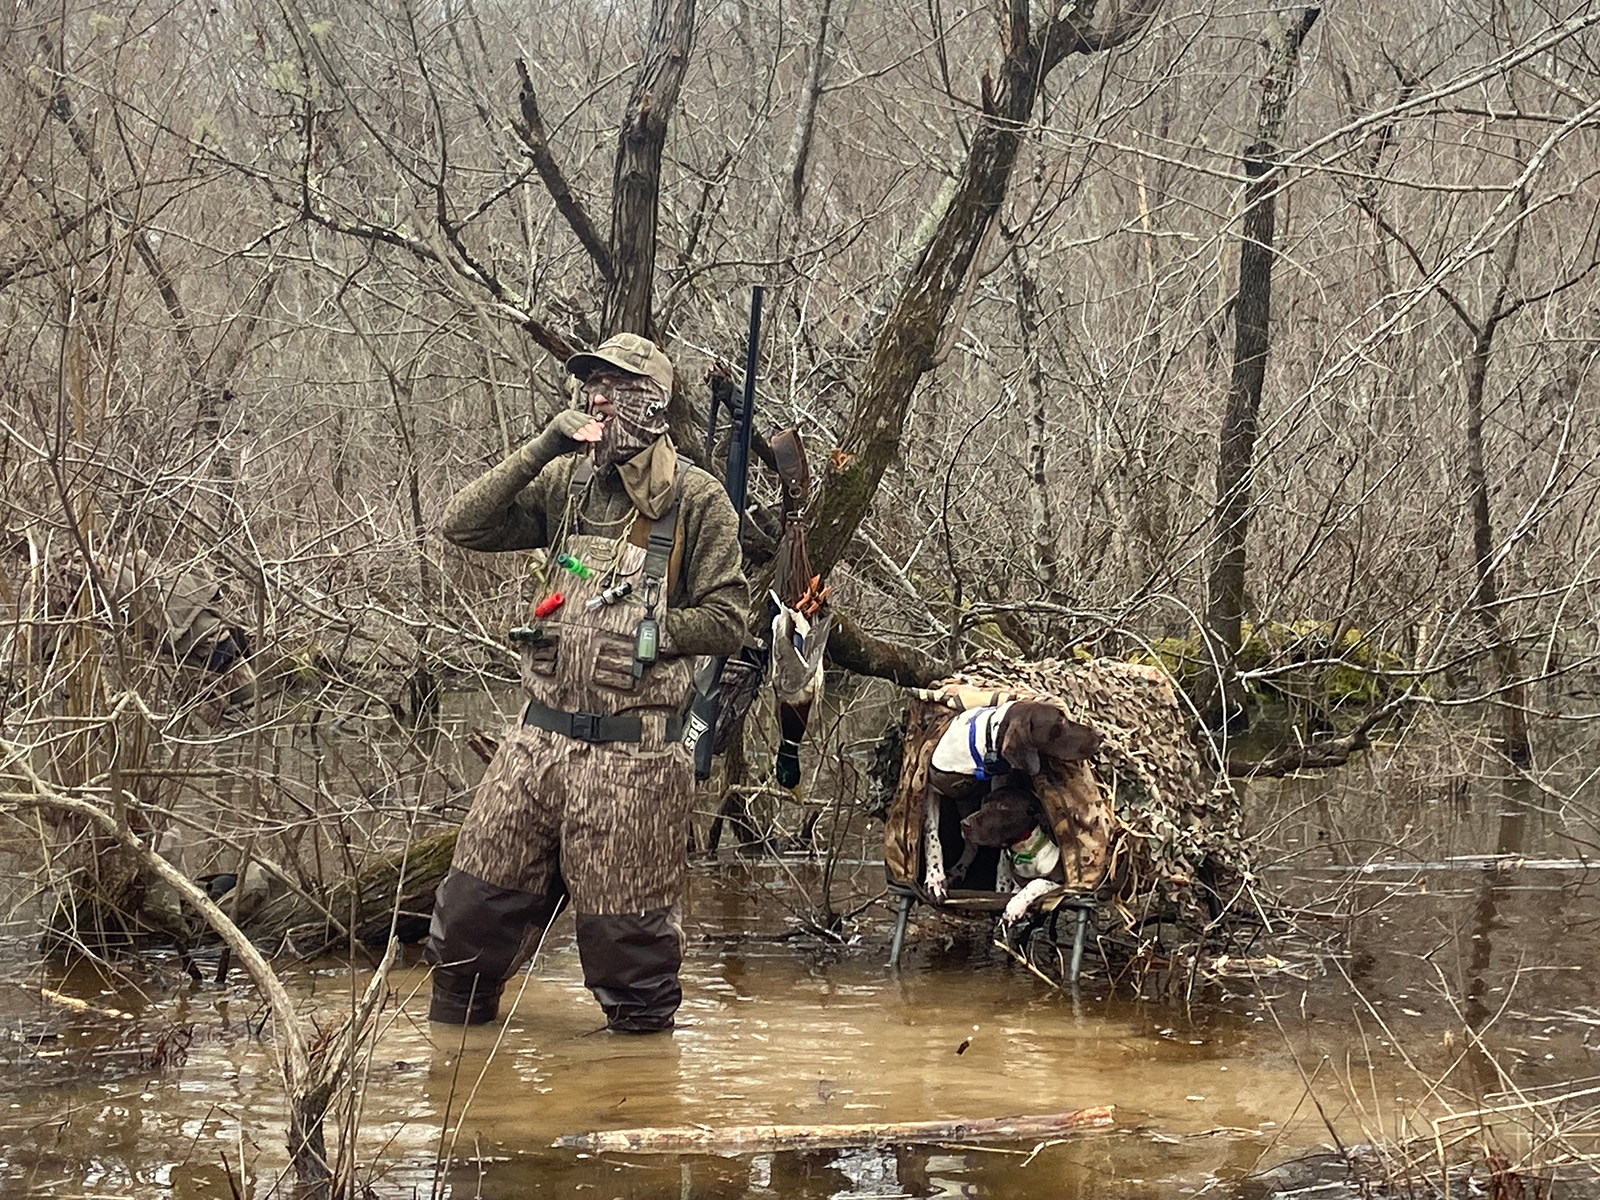 A photo of a duck hunter wading in a marsh, wearing darker-colored camouflage. A retrieving dog in a crate elevated above the water is next to him.